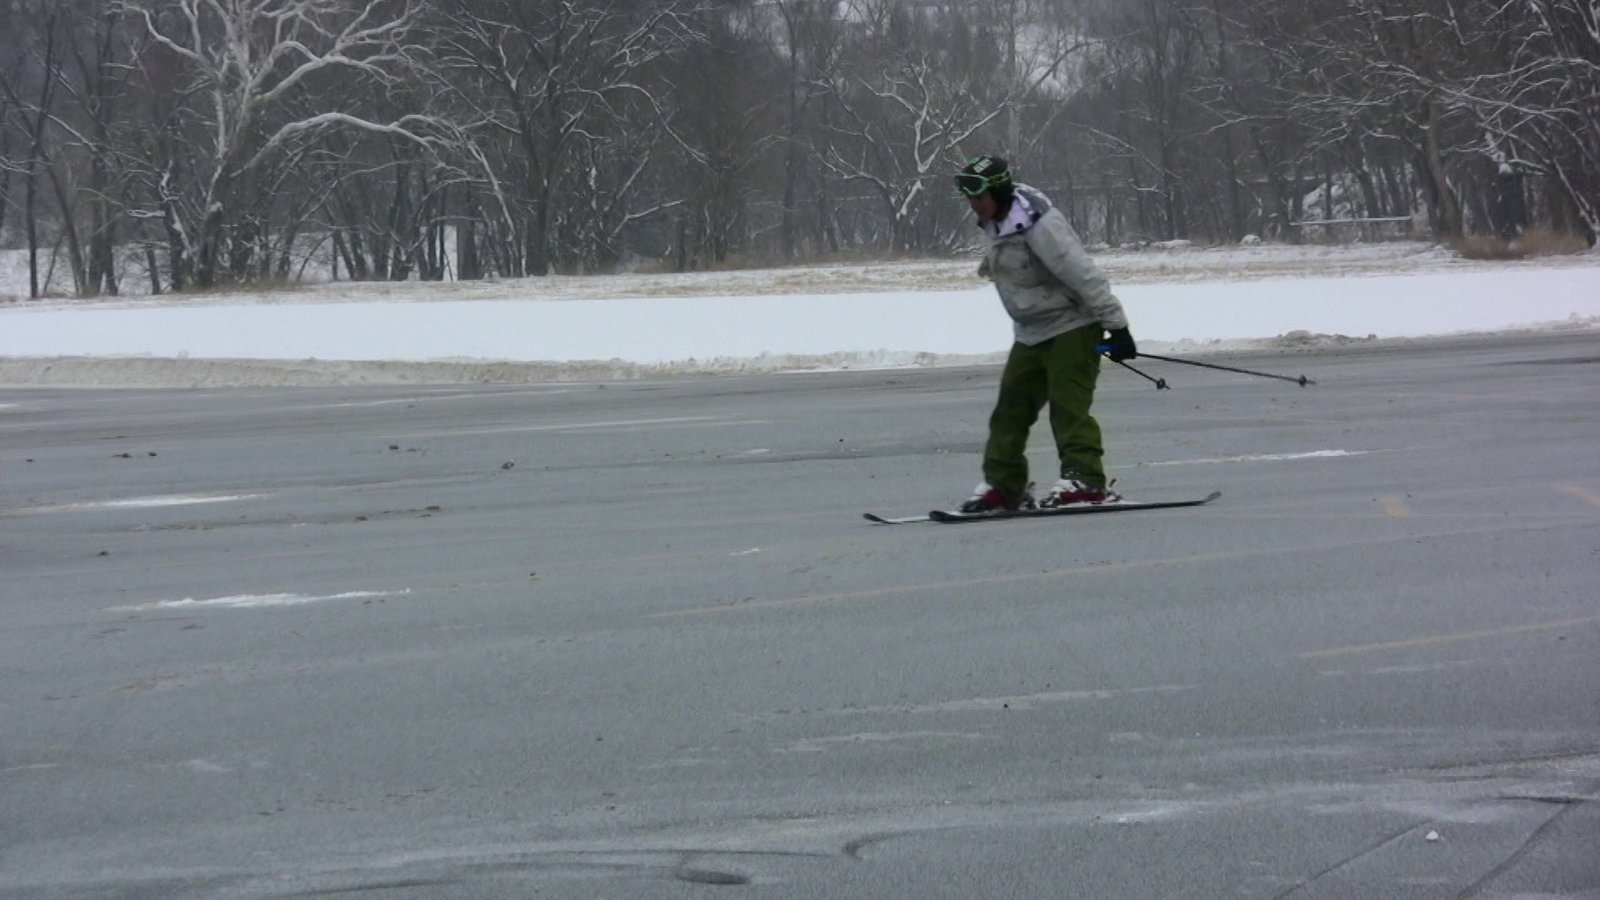 Video still: skiing in the parking lot